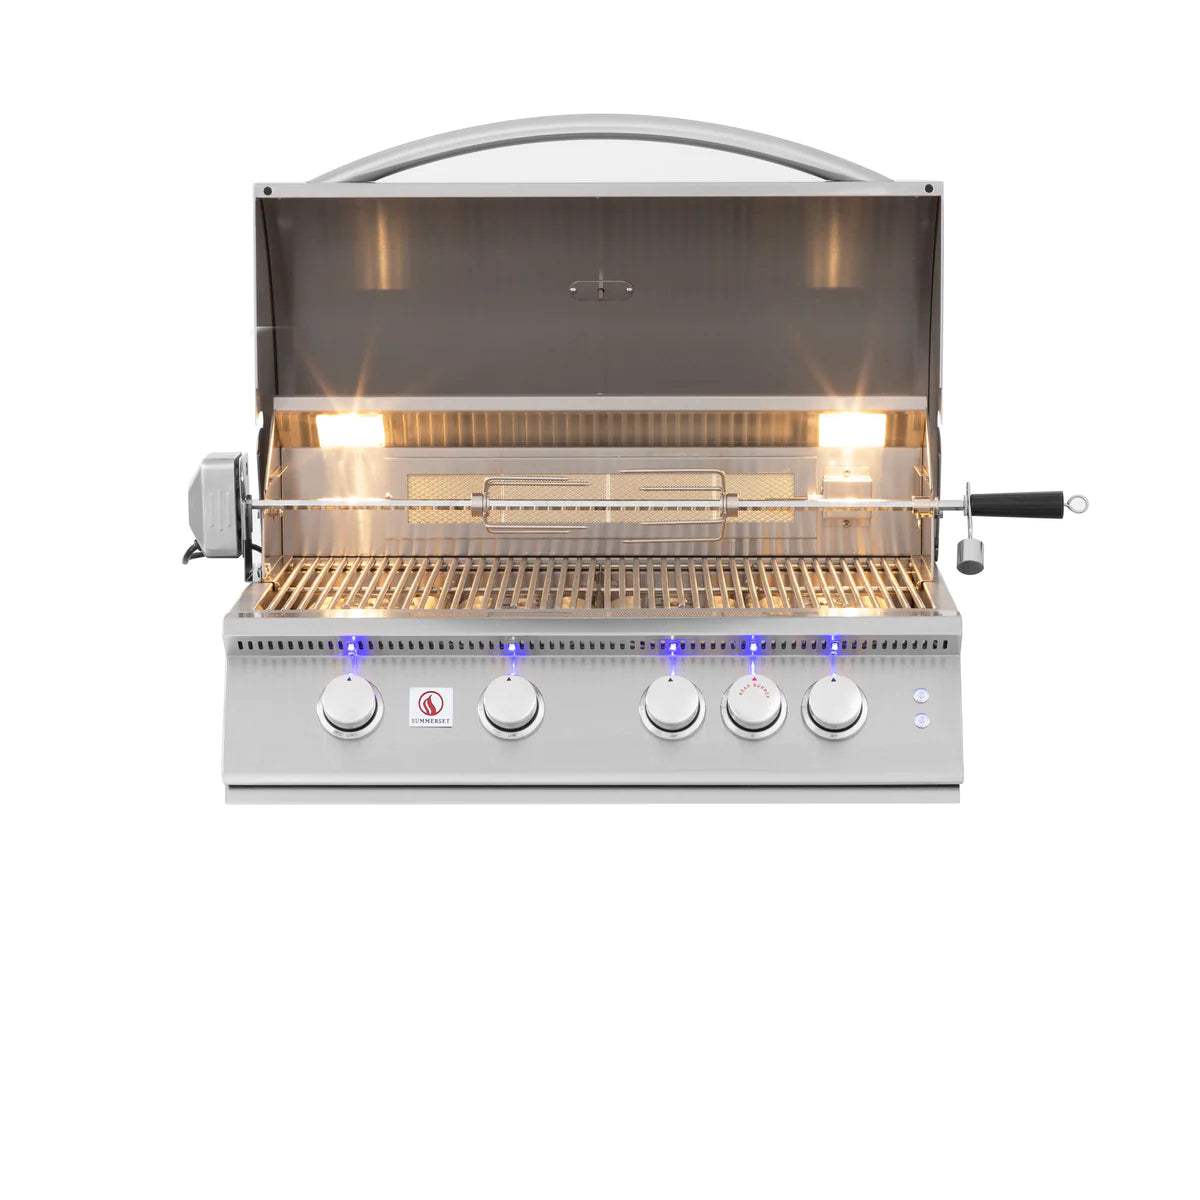 Summerset - Sizzler Professional Series 32" - 4-Burner Built-In Gas Grill